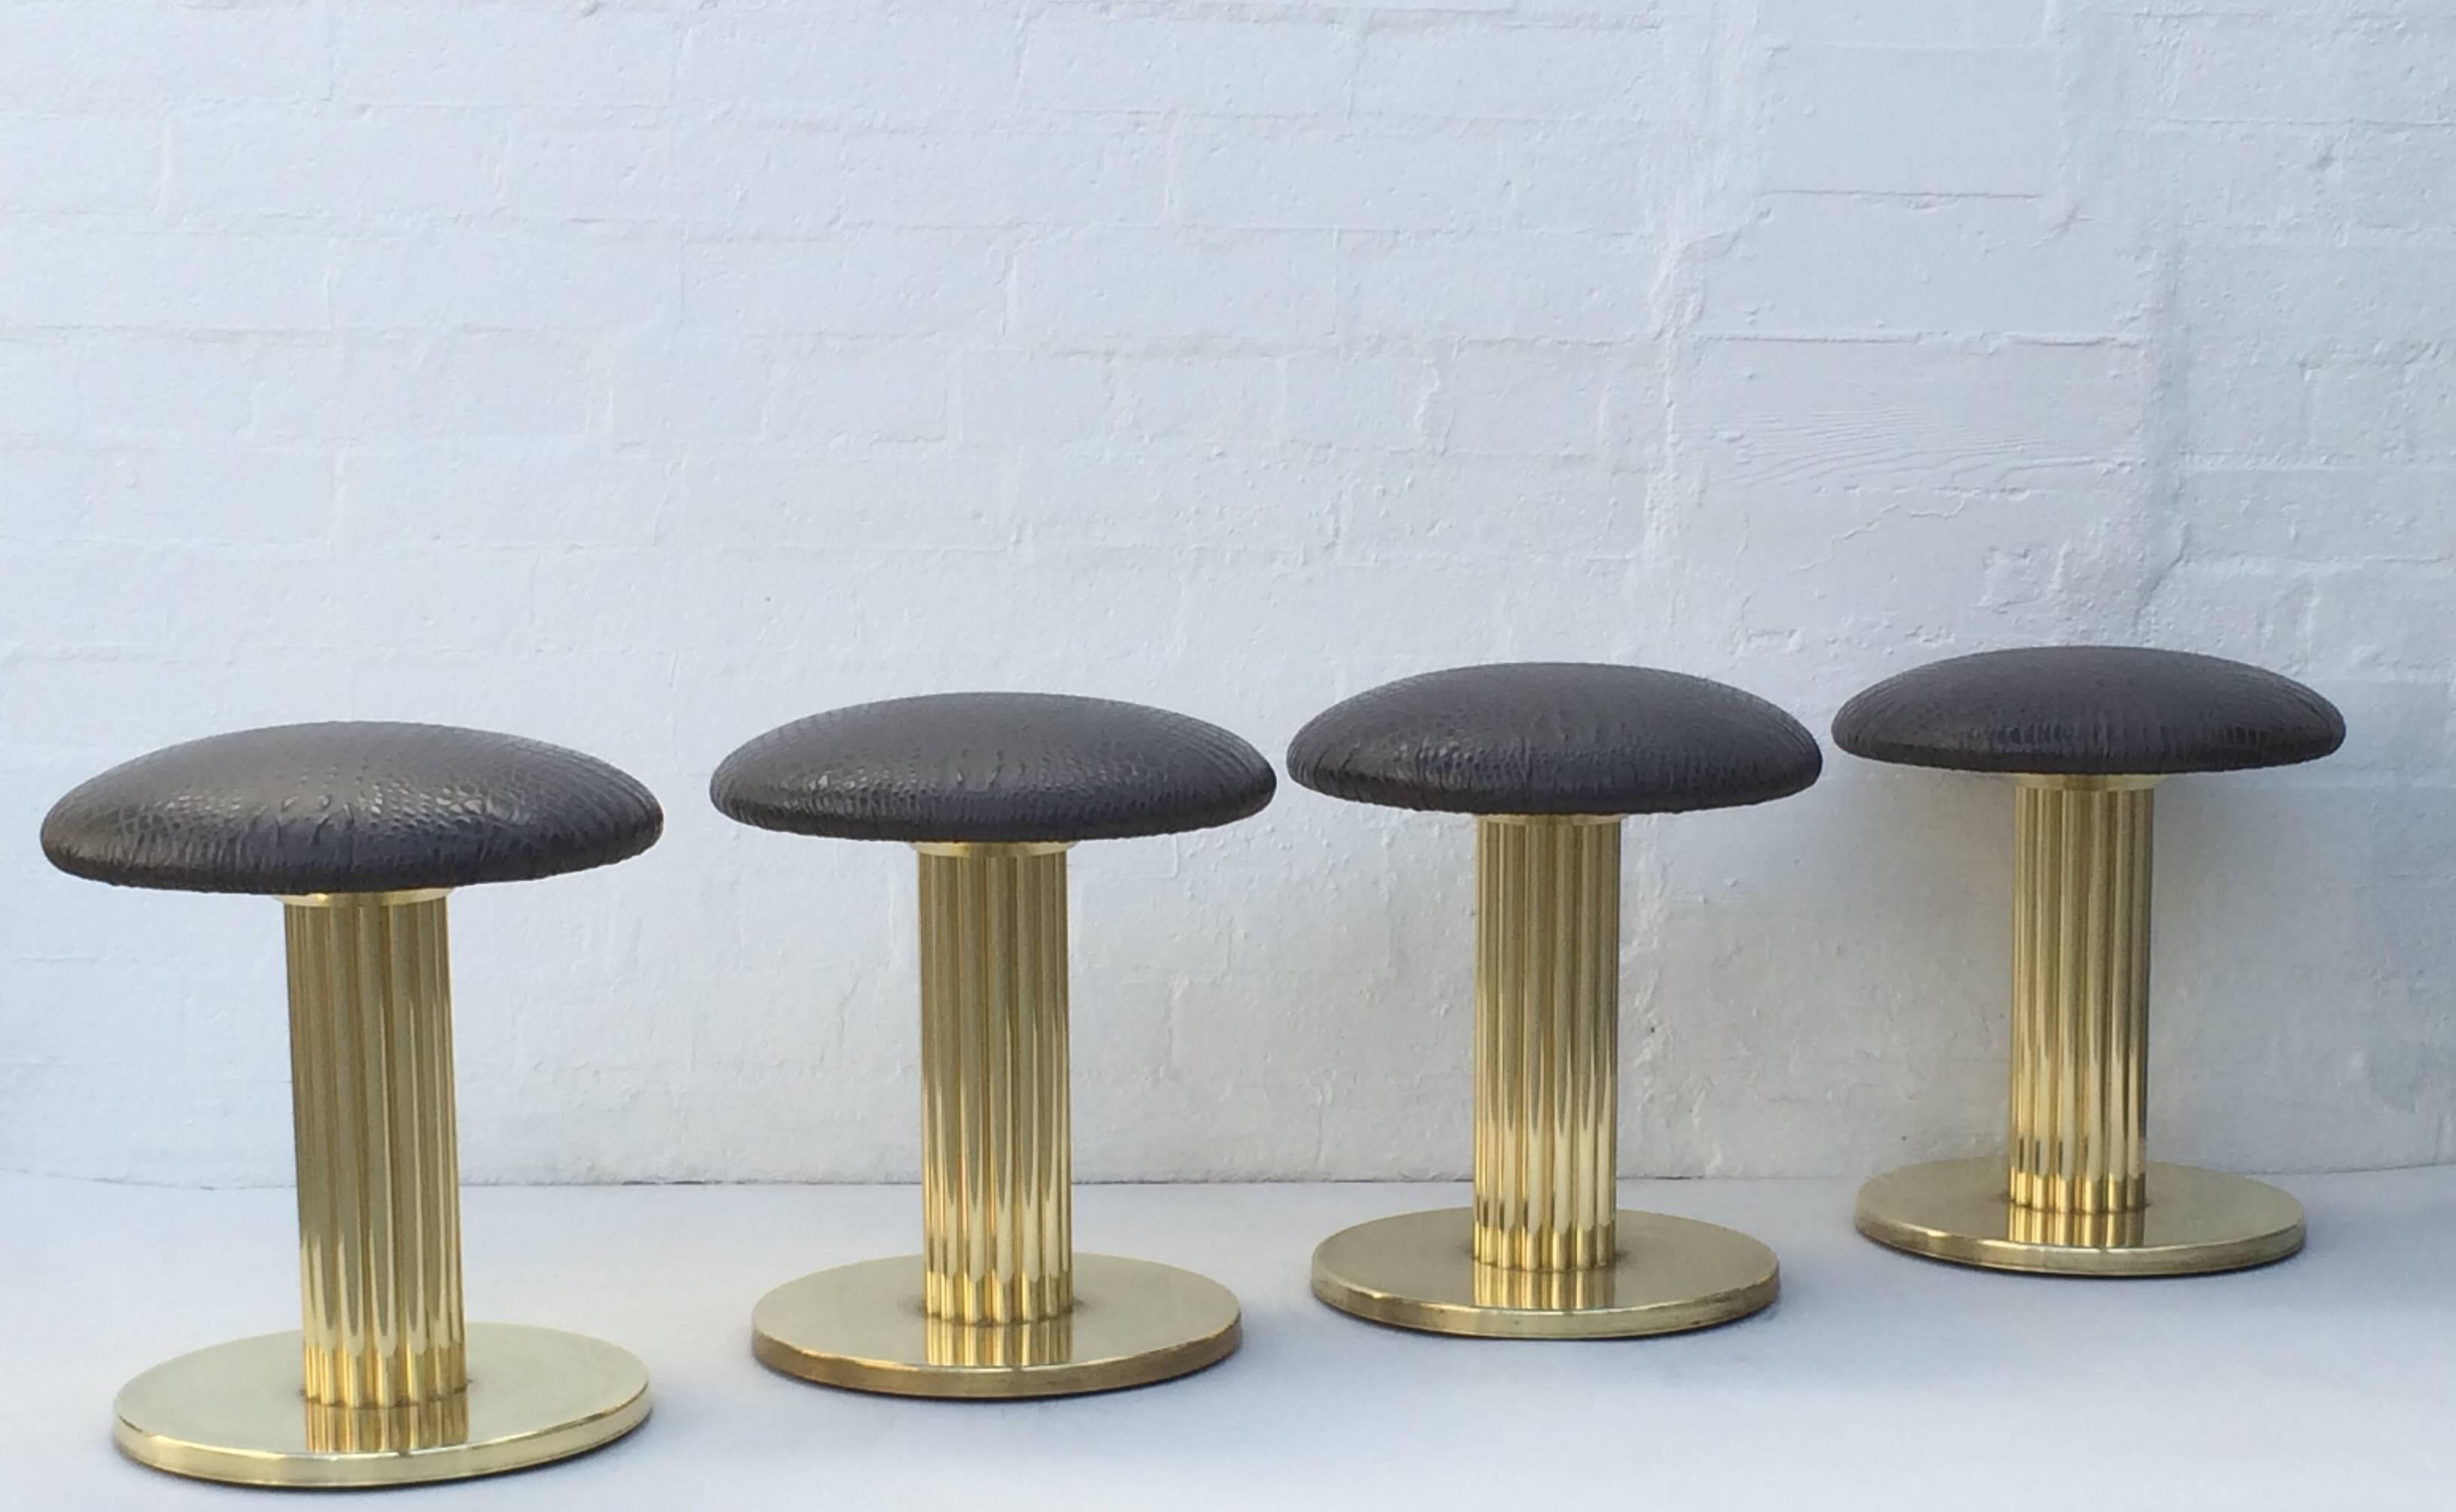 This sexy set of four brass and leather swivel stools were design in the 1980s by Design For Leisure Ltd. The bottom base is a brush brass and the rest is polished brass. The seats are newly reupholstered in a gray embossed crocodile leather.